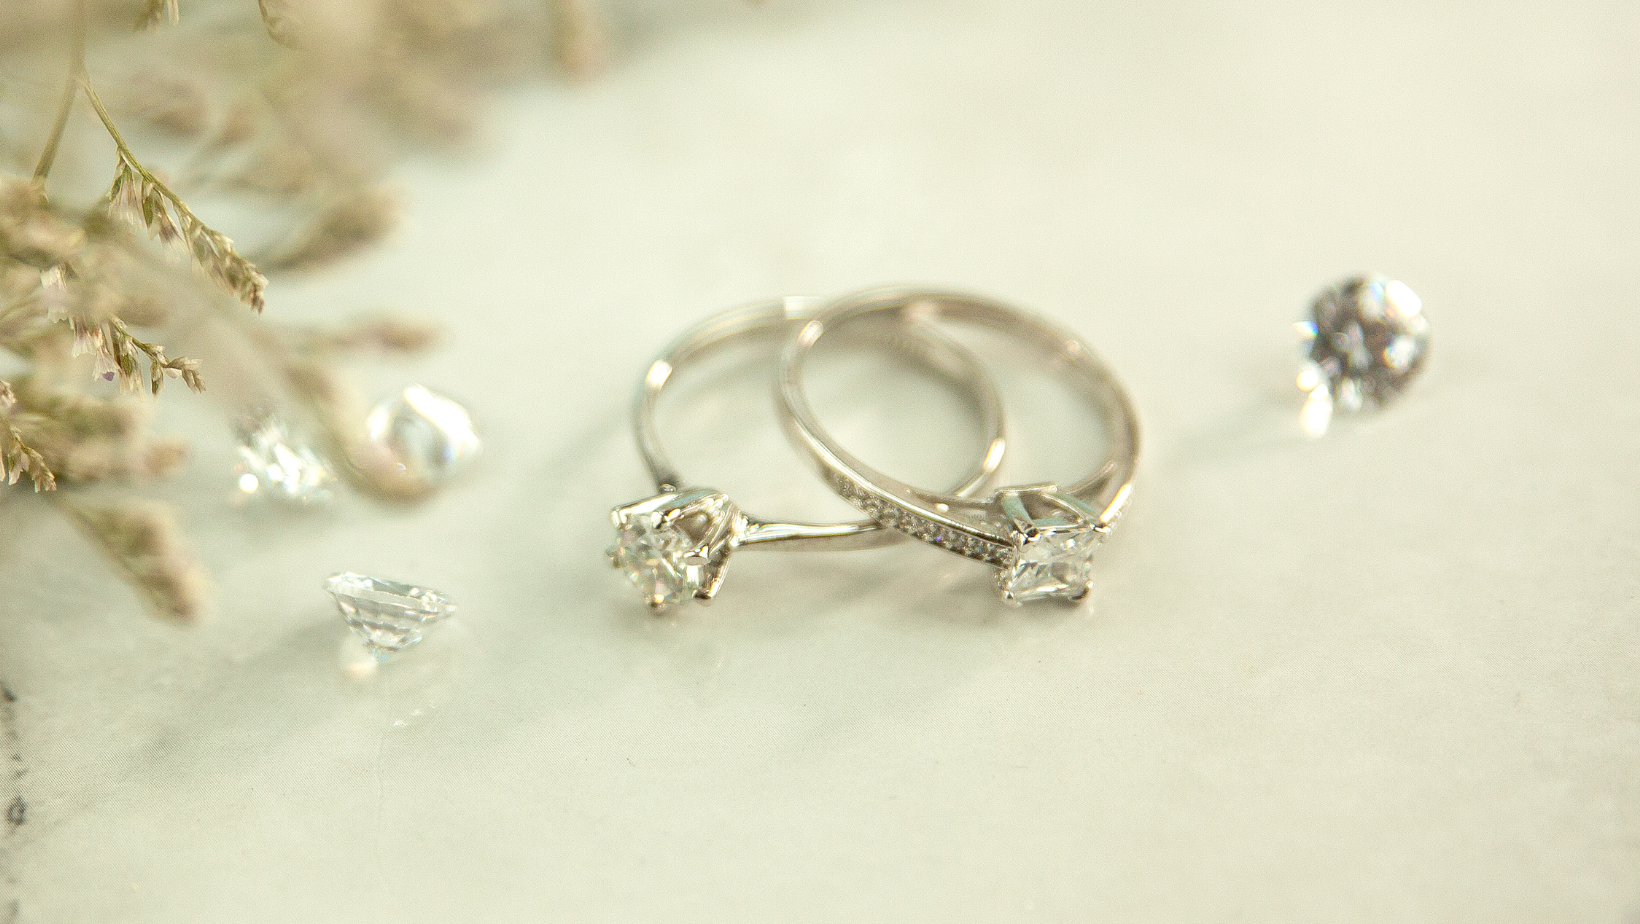 9 Very Elegant Engagement Ring Ideas That Will Wow Your Partner